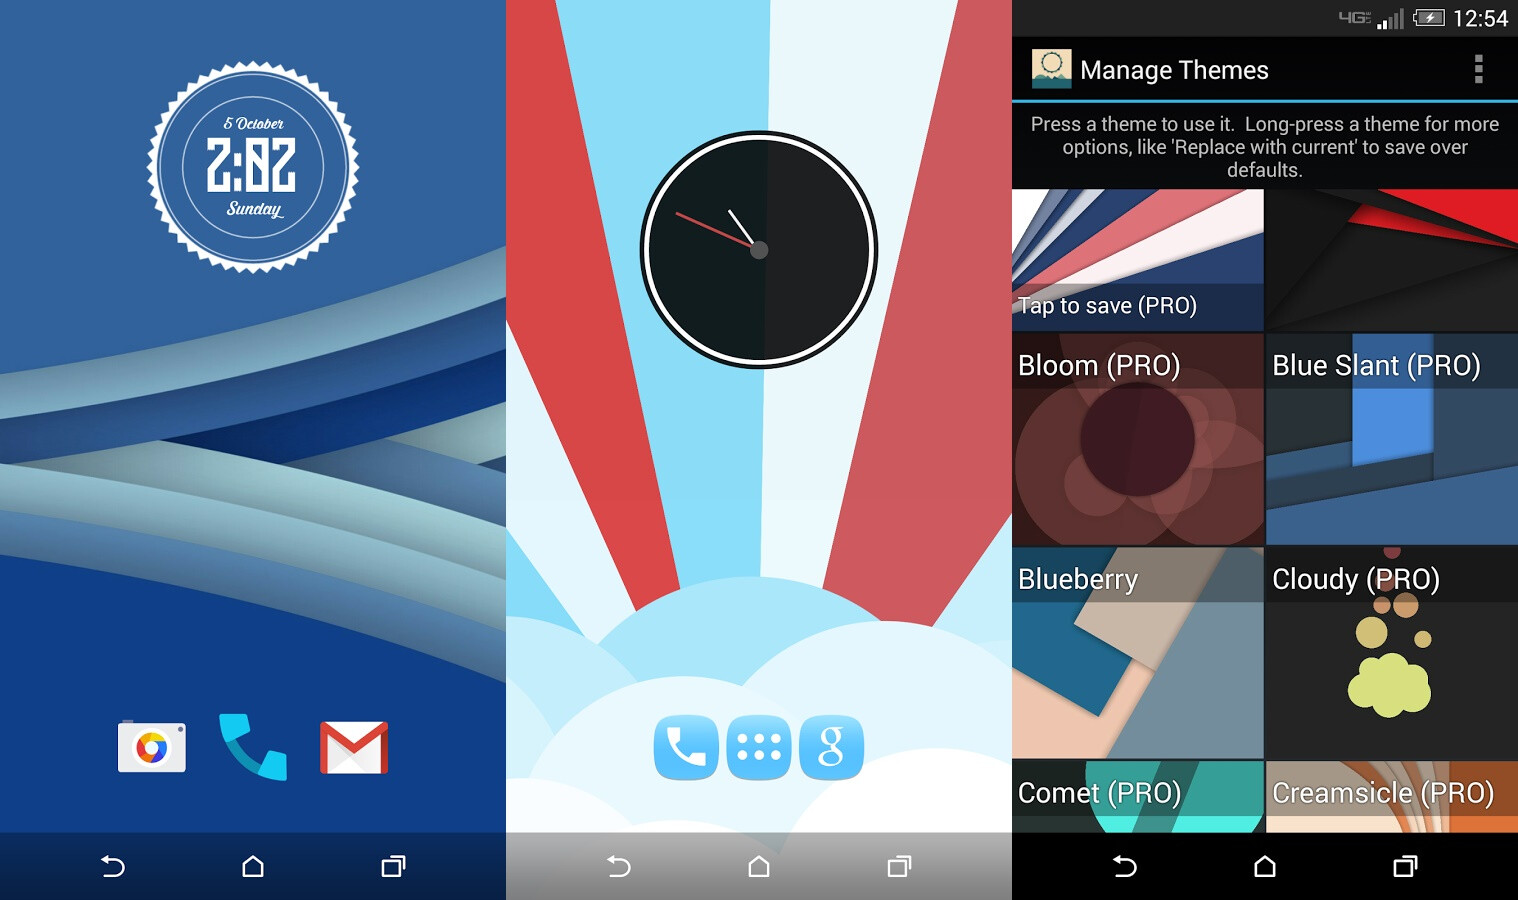 How to Make Live Wallpaper for Your Android Phone - Techlicious